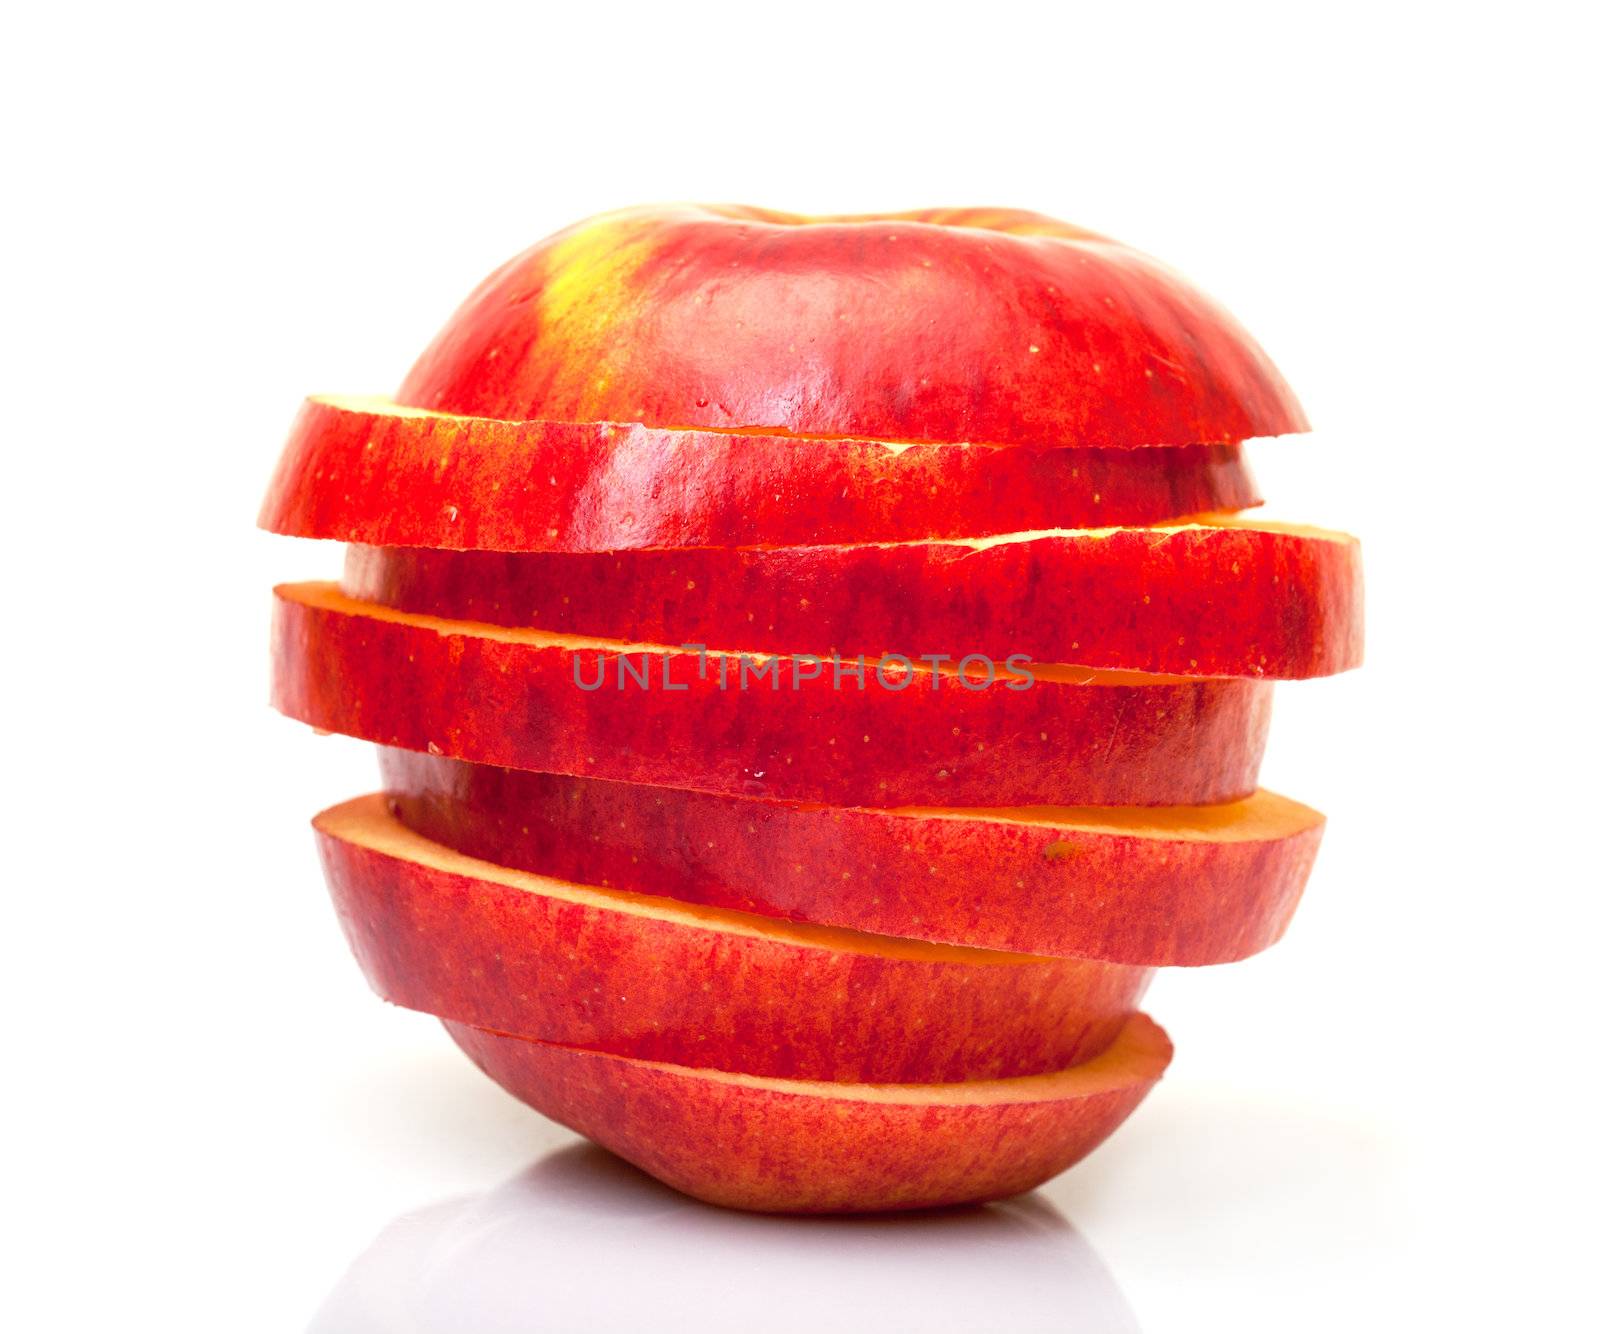 Red Sliced Apple by Discovod